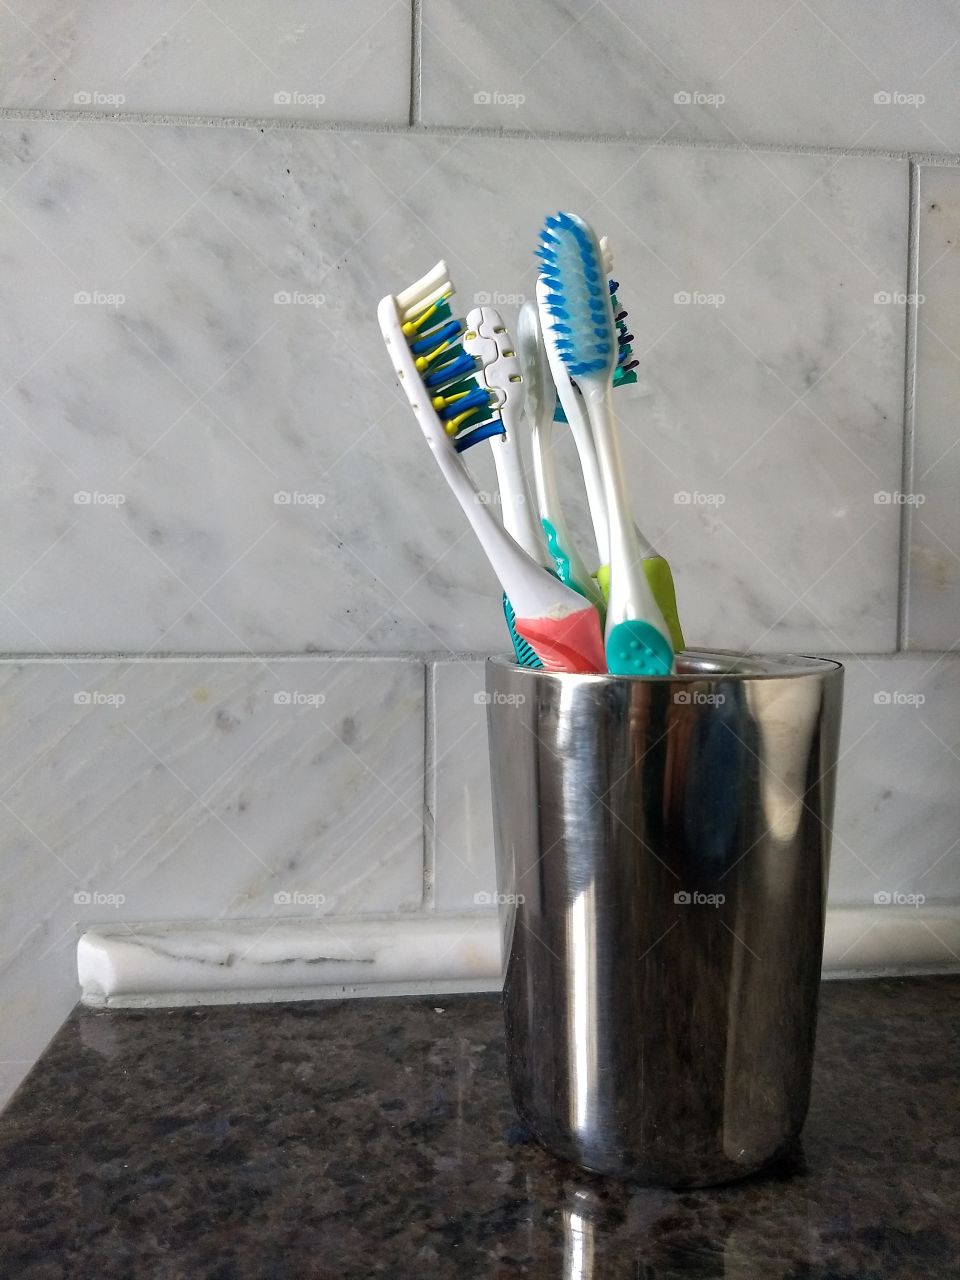 Toothbrushes In Repose